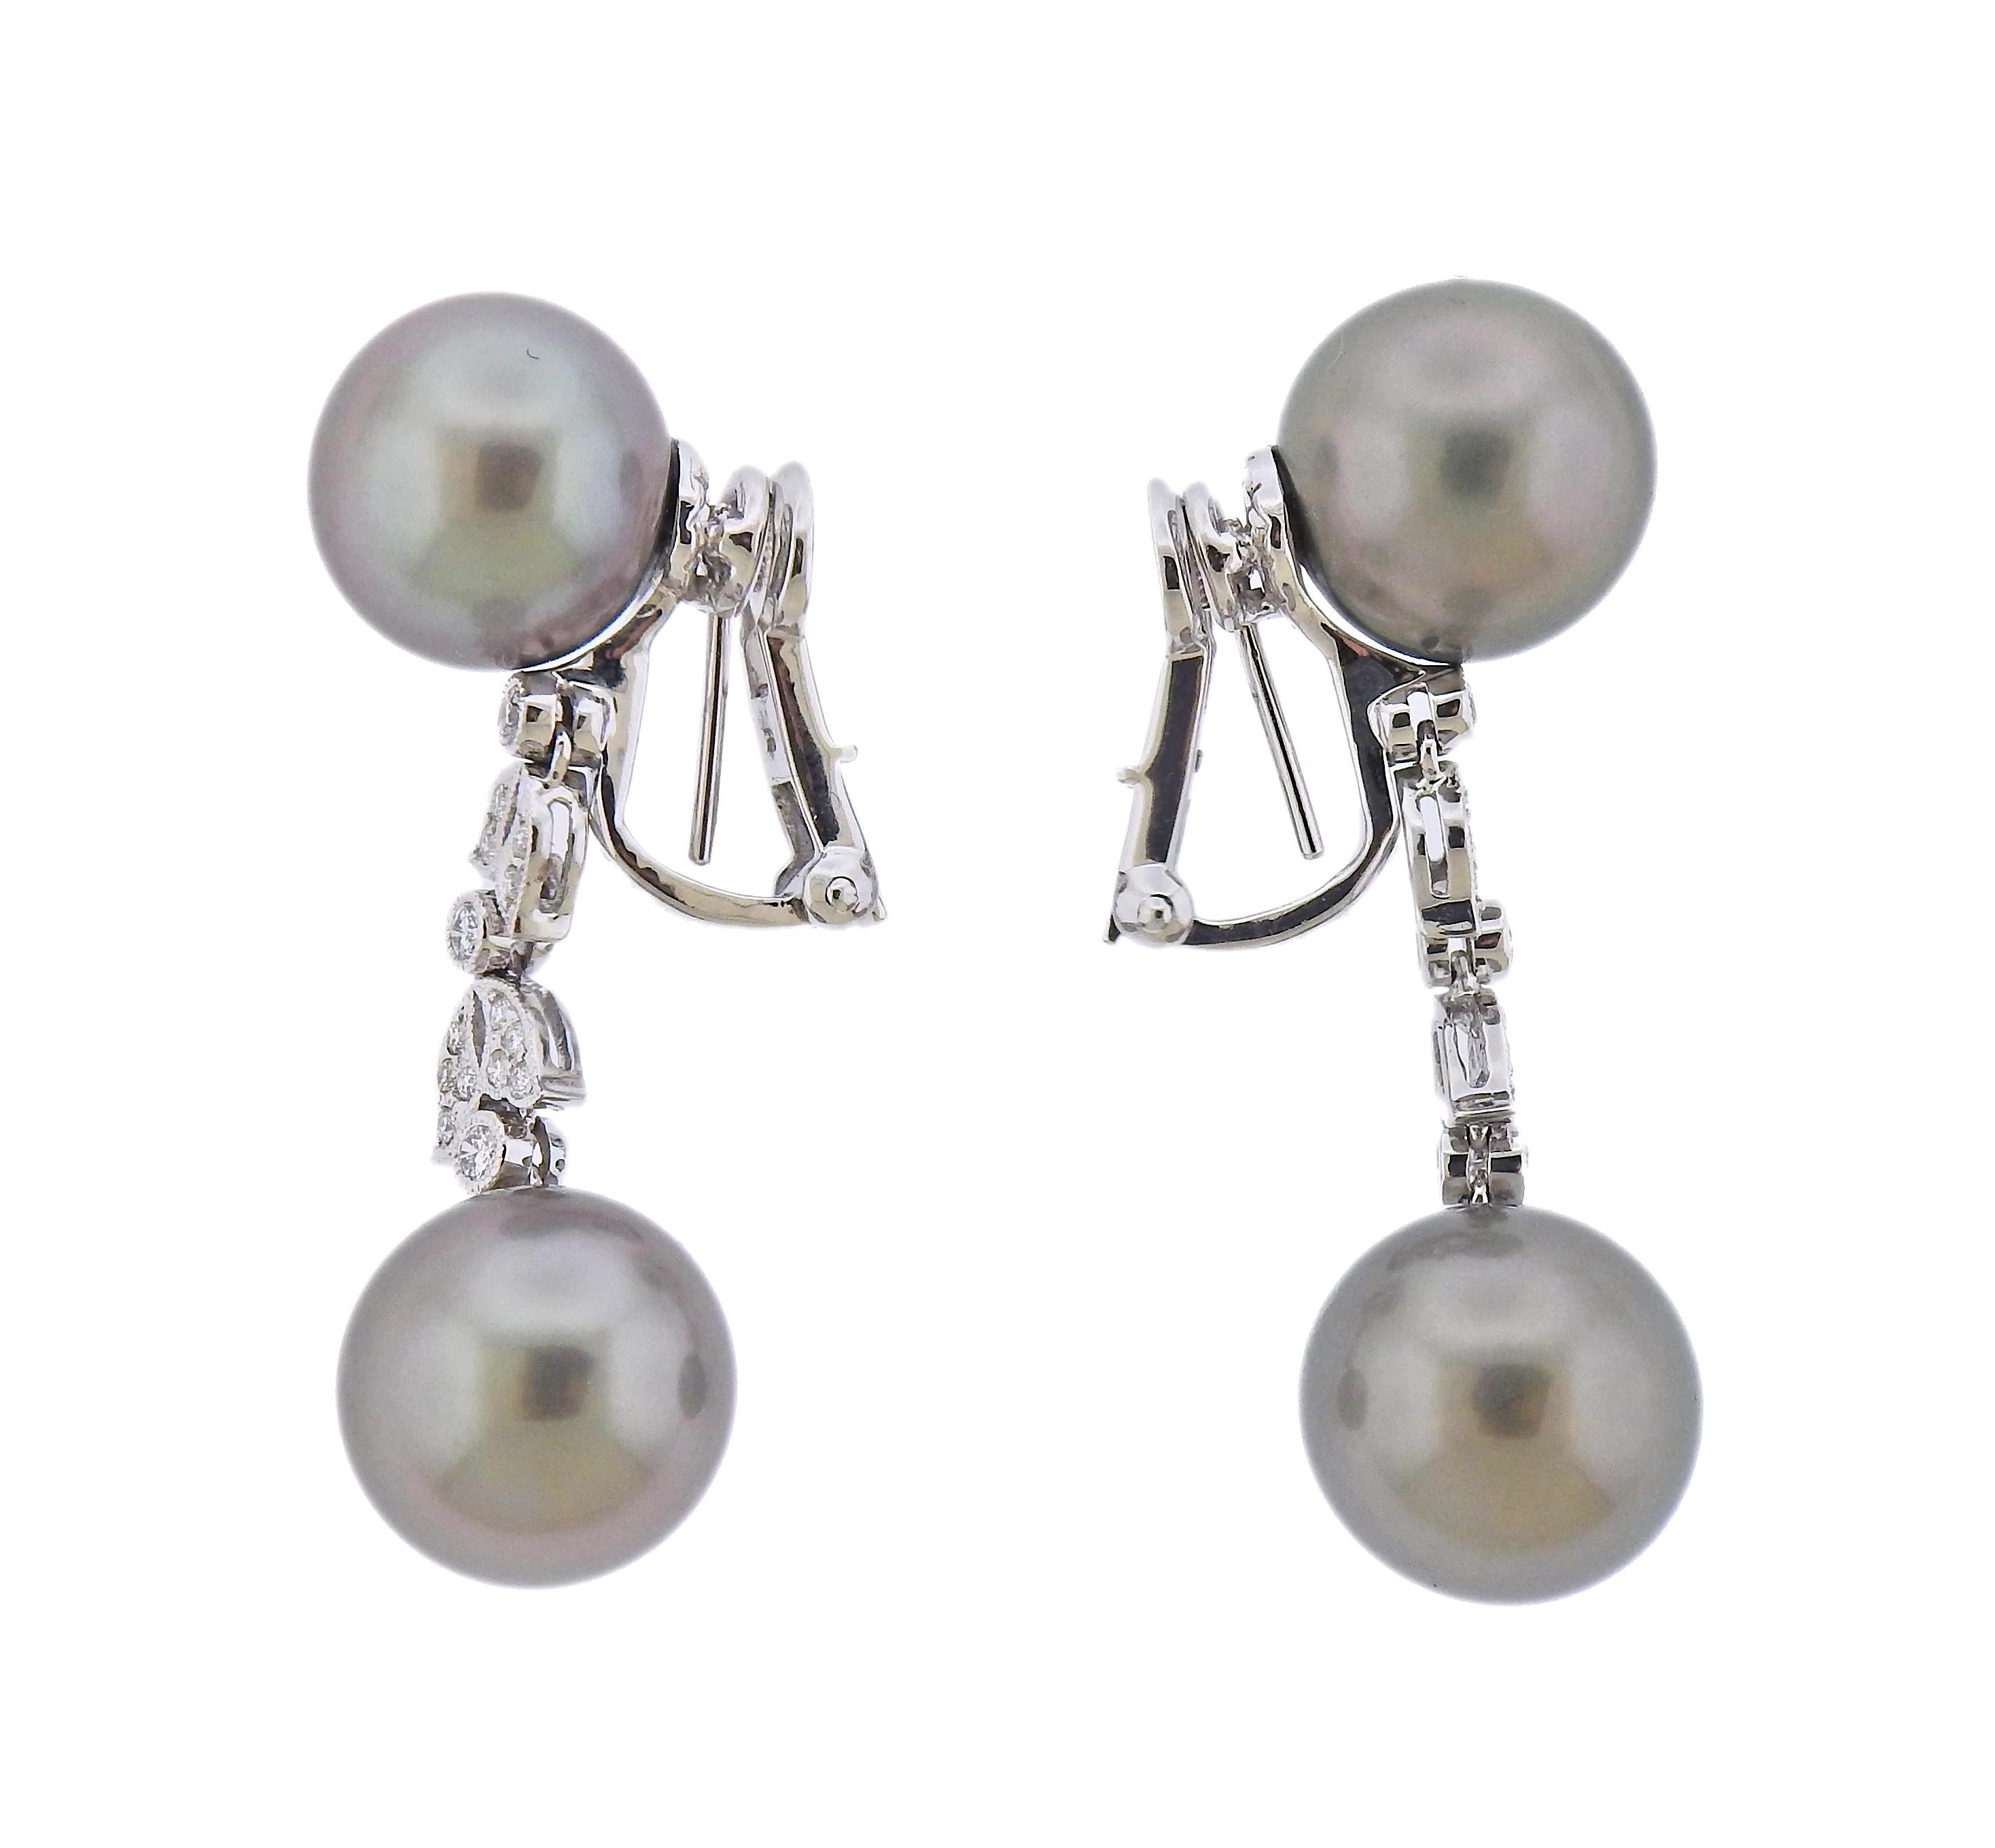 18k white gold South Sea Pearl drop earrings by Assael, set with approx 0.33ctw of VS G diamonds. Brand new without tags, comes with Assael pouch. Retail - $9500.  Earrings are 43mm long. Pearls measure 12.2-12.6mm.  Marked: 750. weight - 17.8